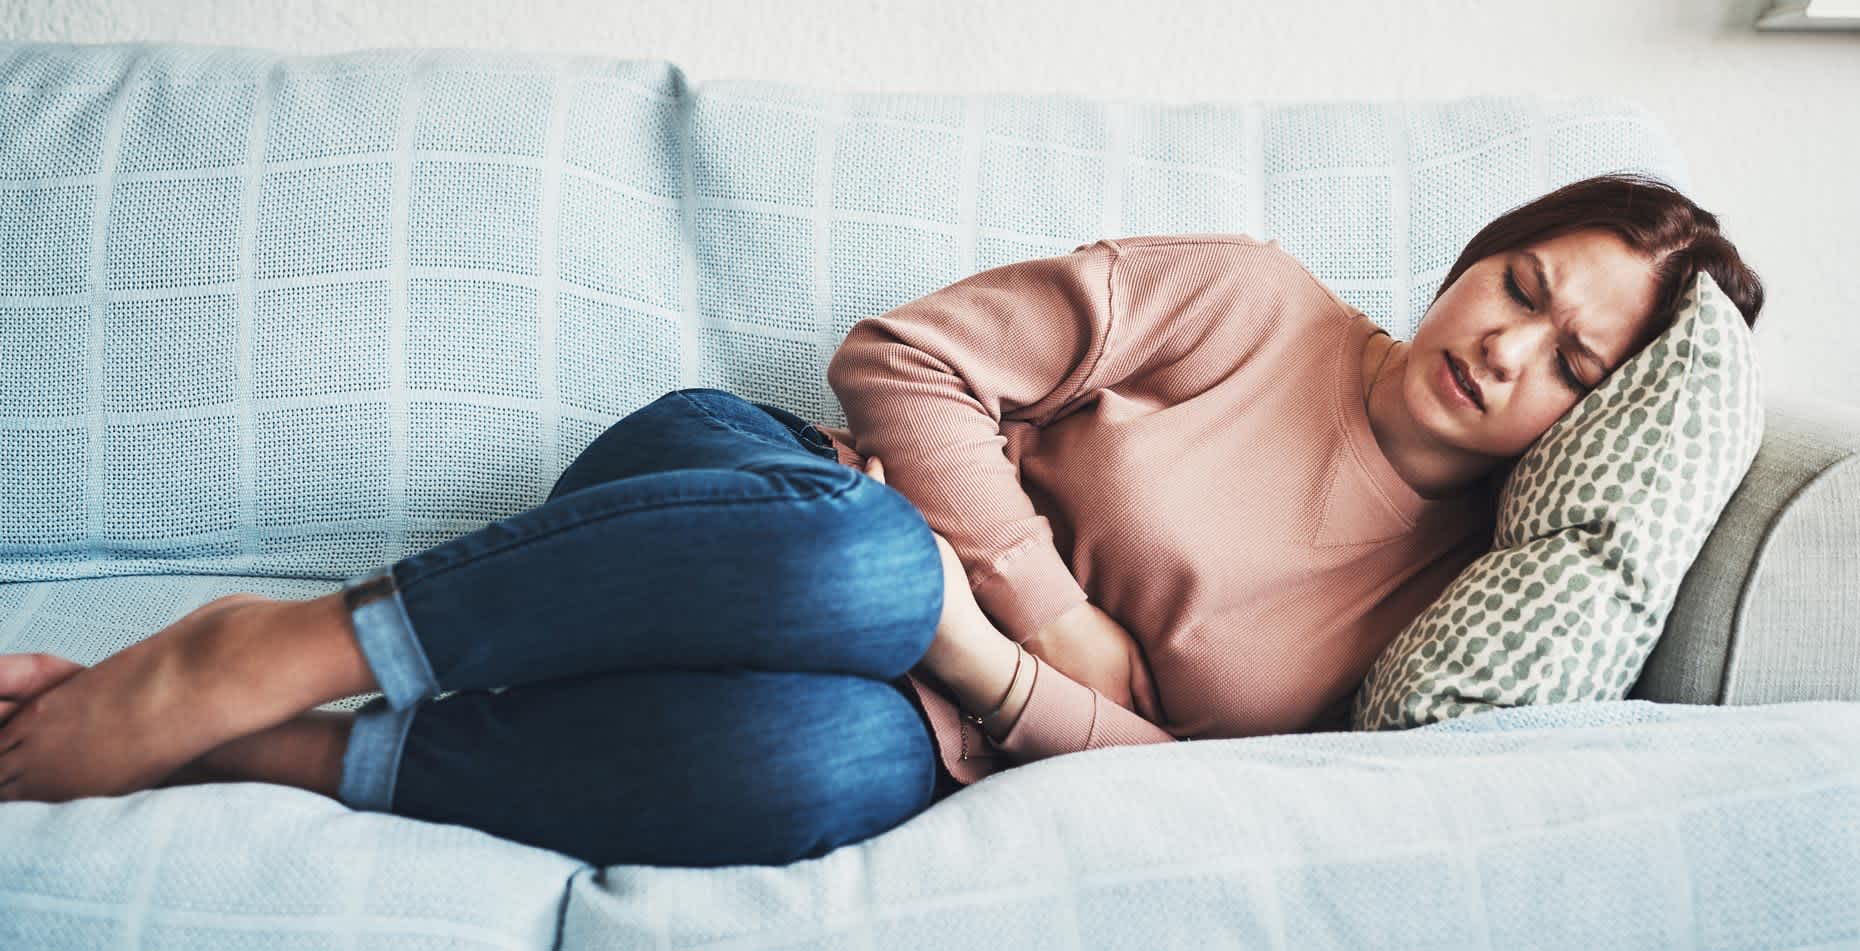 Young woman lying on couch due to stress affecting her digestive system